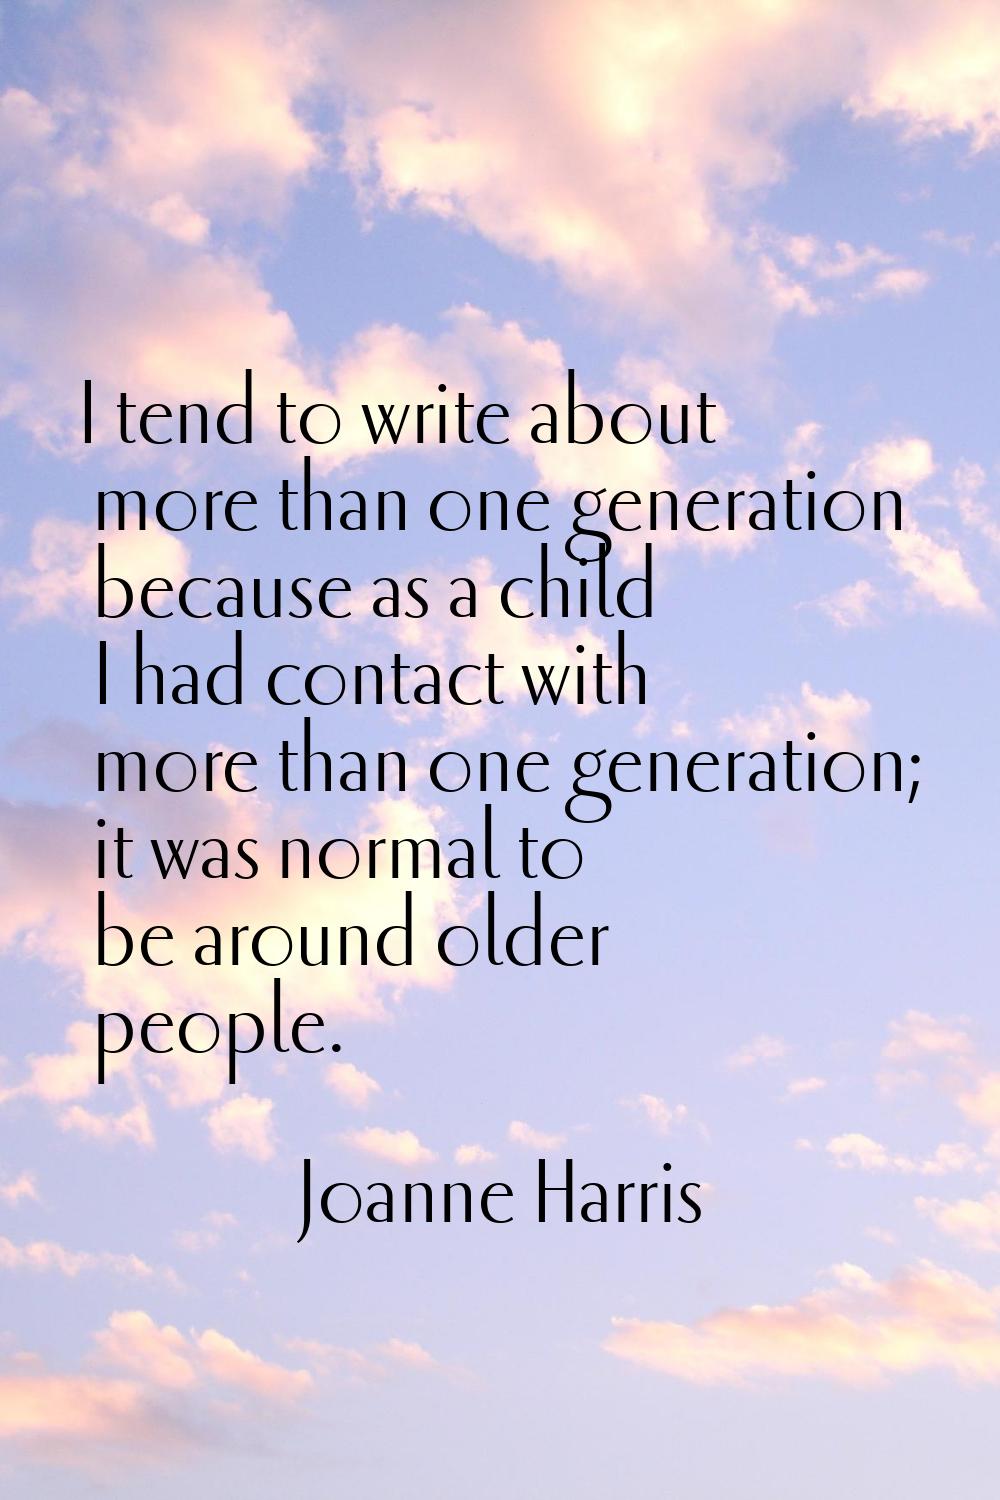 I tend to write about more than one generation because as a child I had contact with more than one 